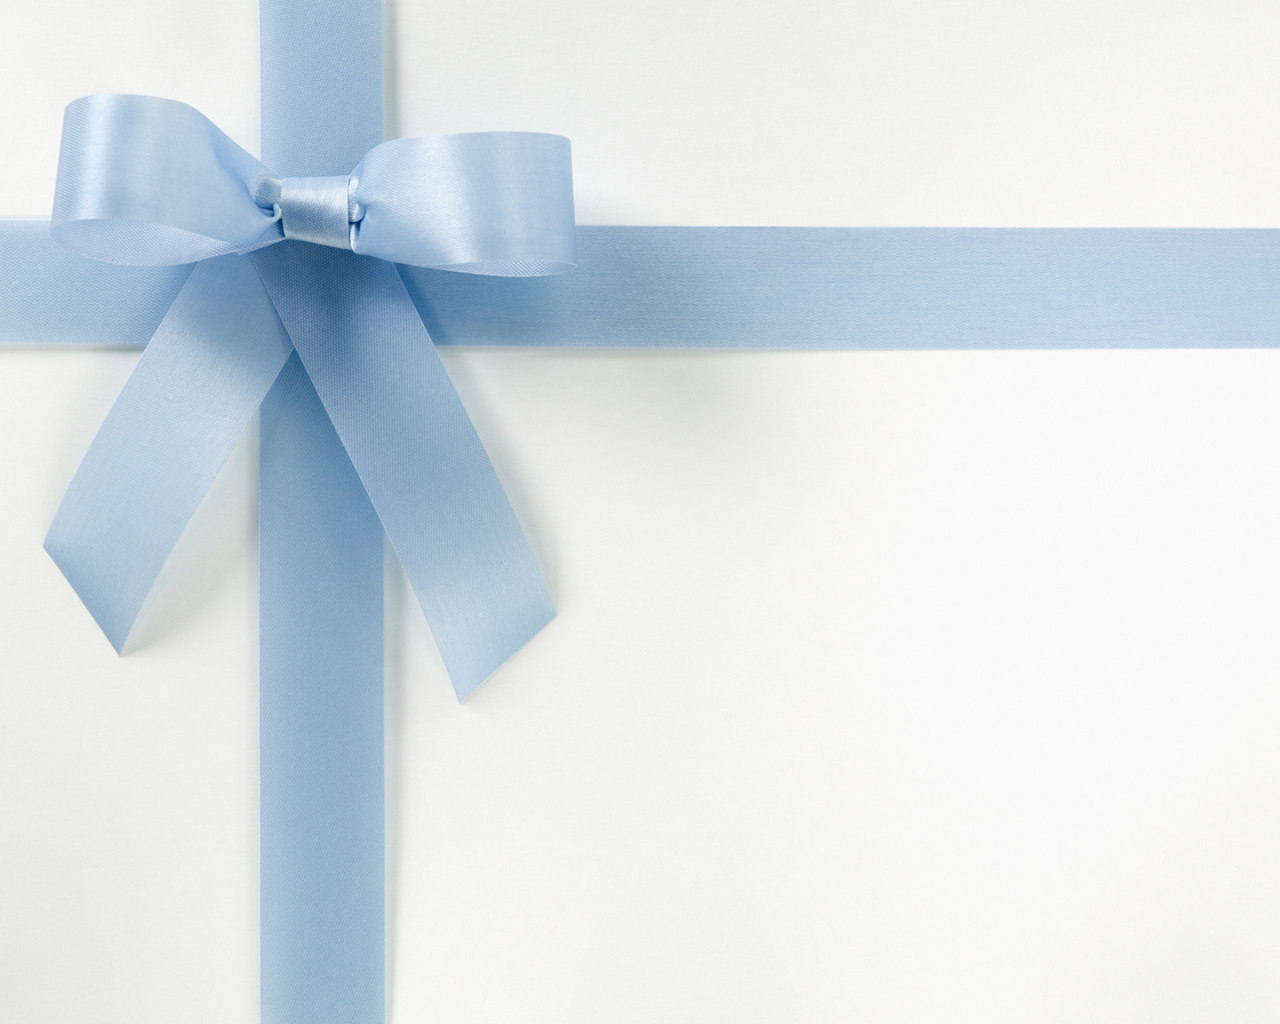 Ribbon Photos Download The BEST Free Ribbon Stock Photos  HD Images